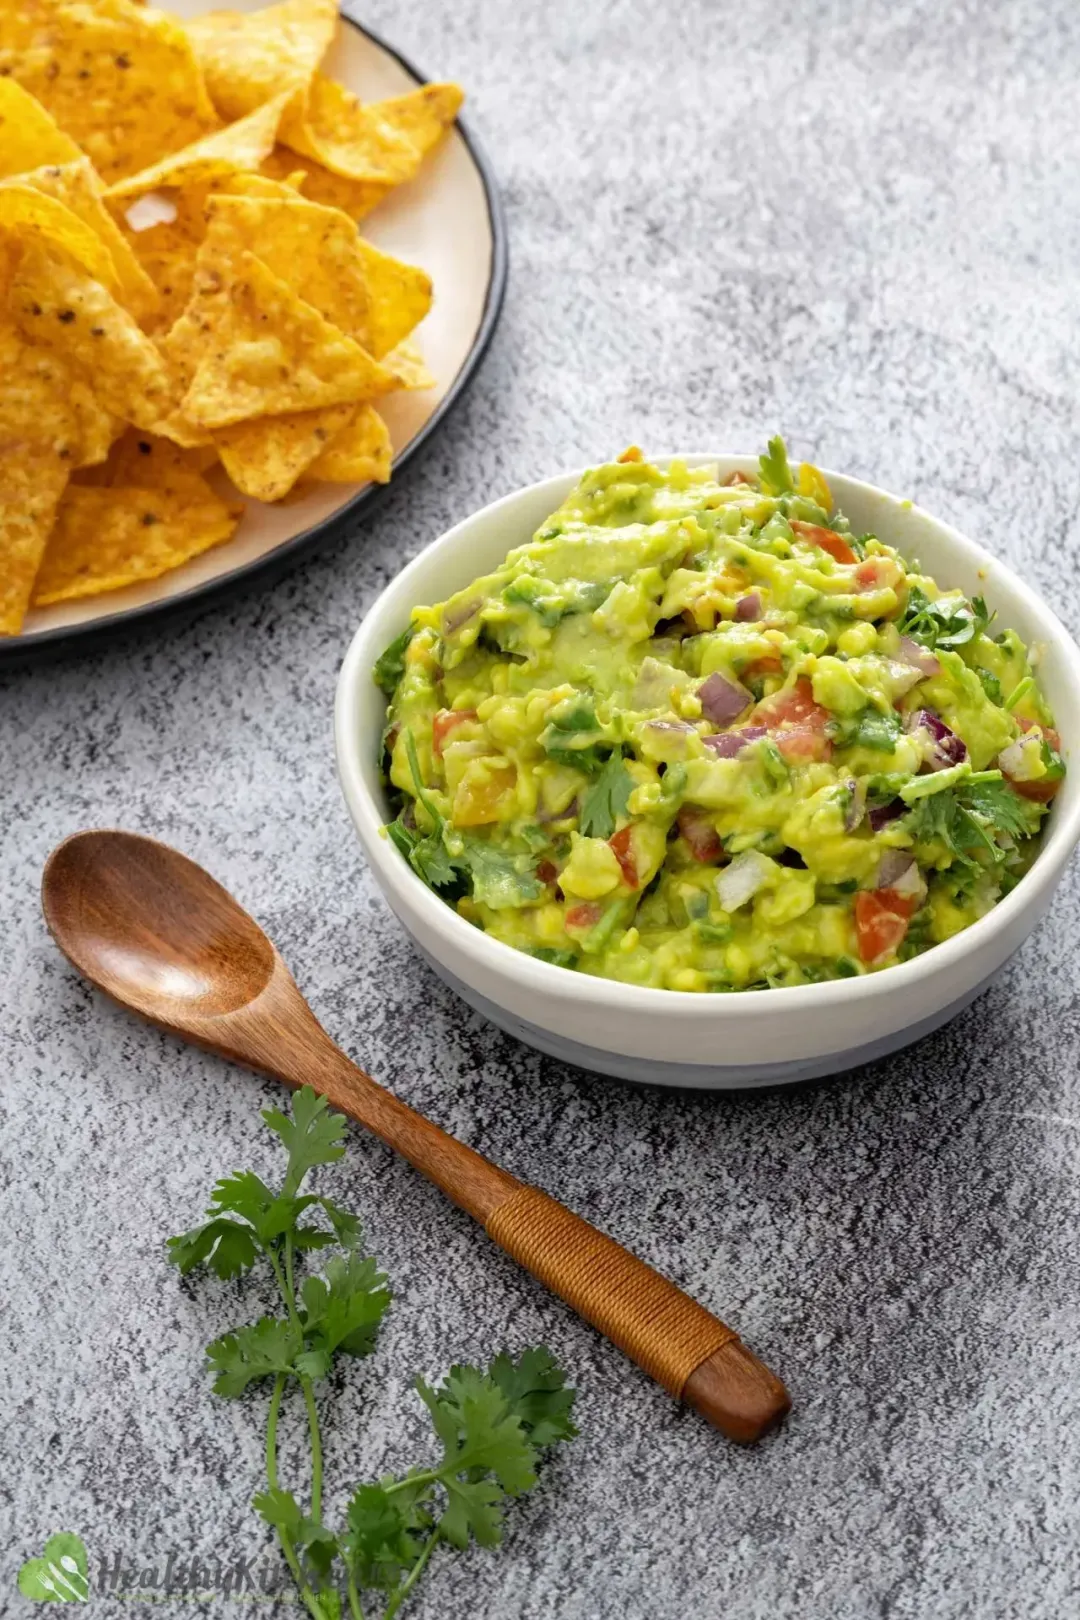 A close-up of guacamole with diced tomatoes and onions, garnished with cilantro on a white plate, next to a wooden spoon and a plate of chips